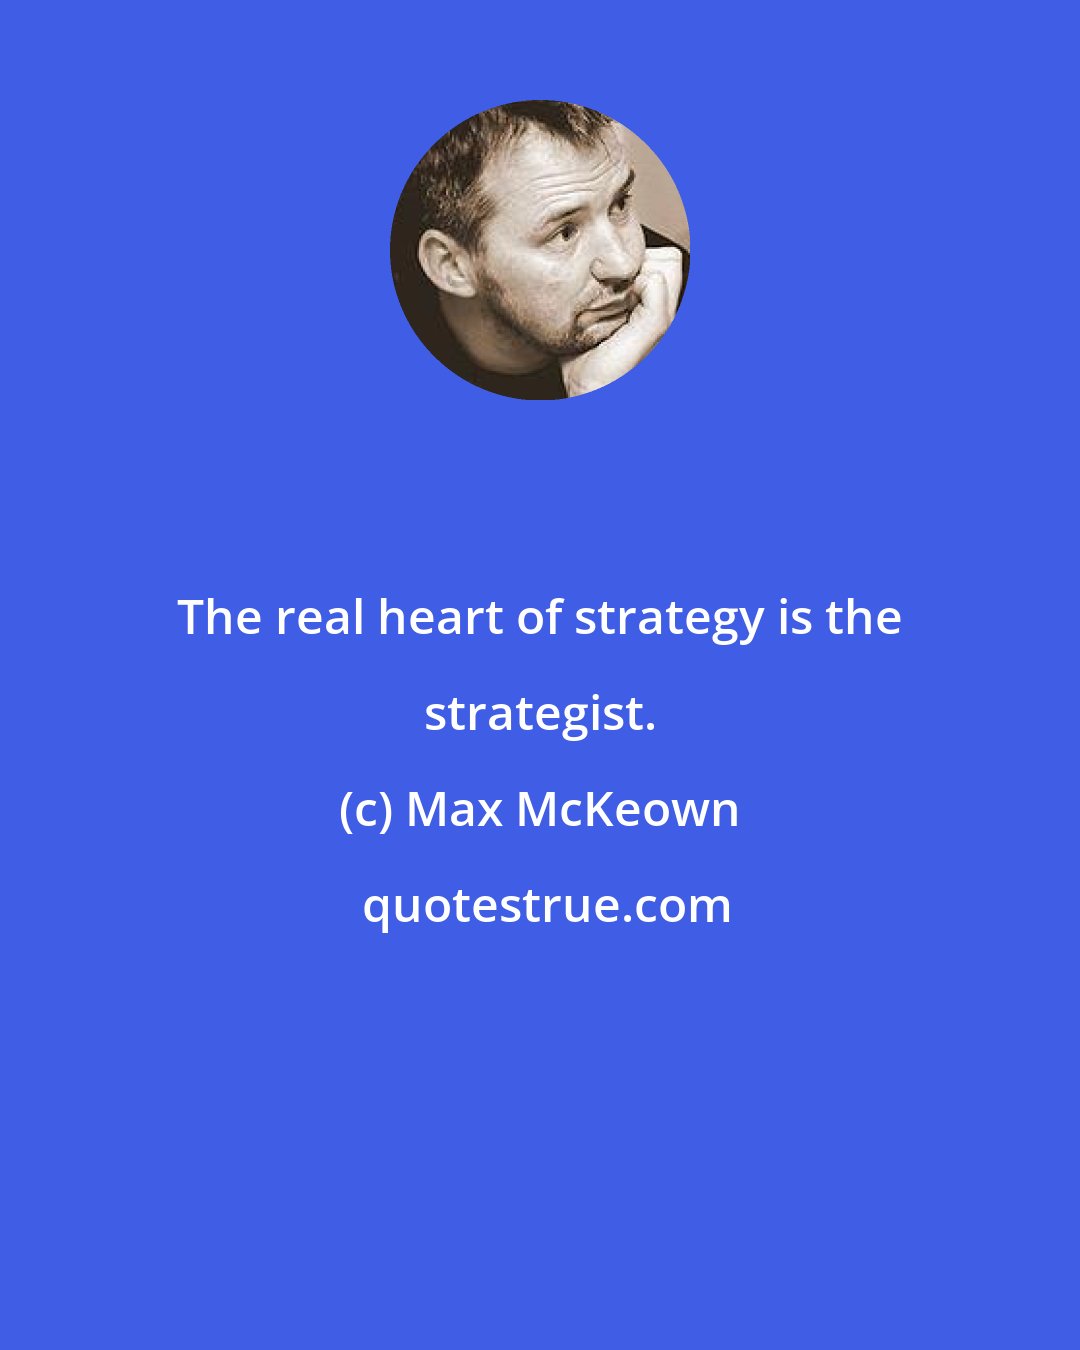 Max McKeown: The real heart of strategy is the strategist.